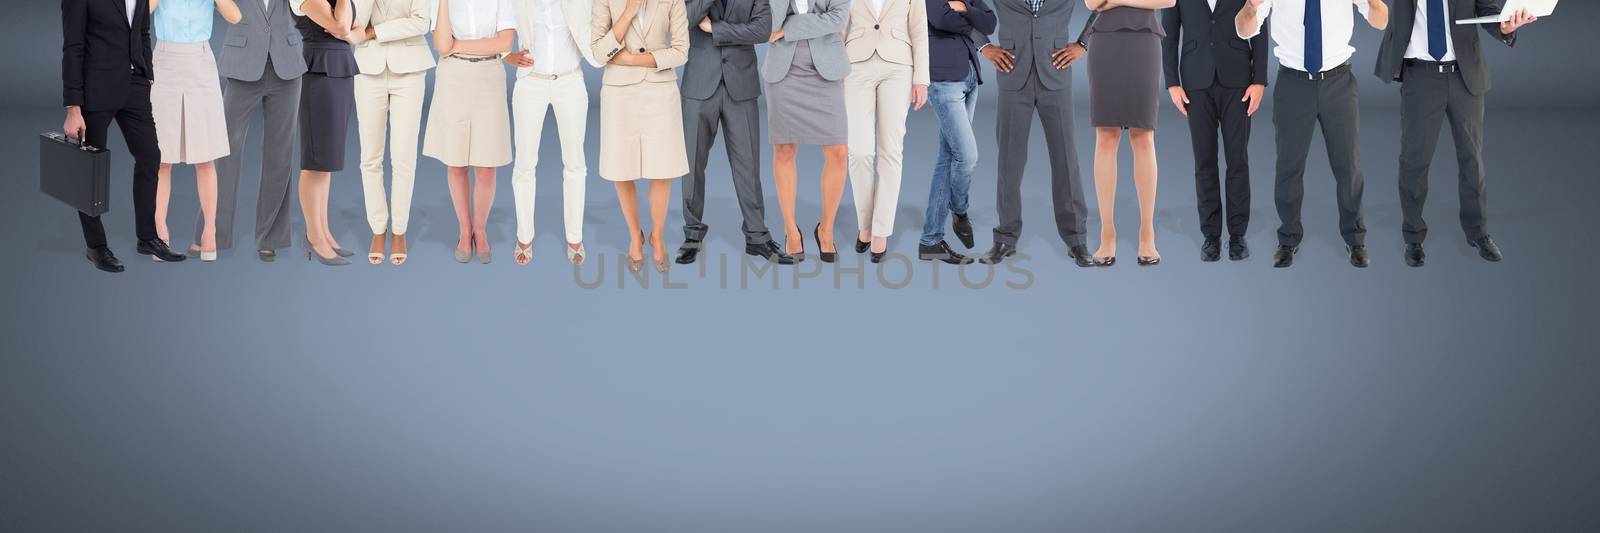 Digital composite of Group of Business People standing with blue vignette background